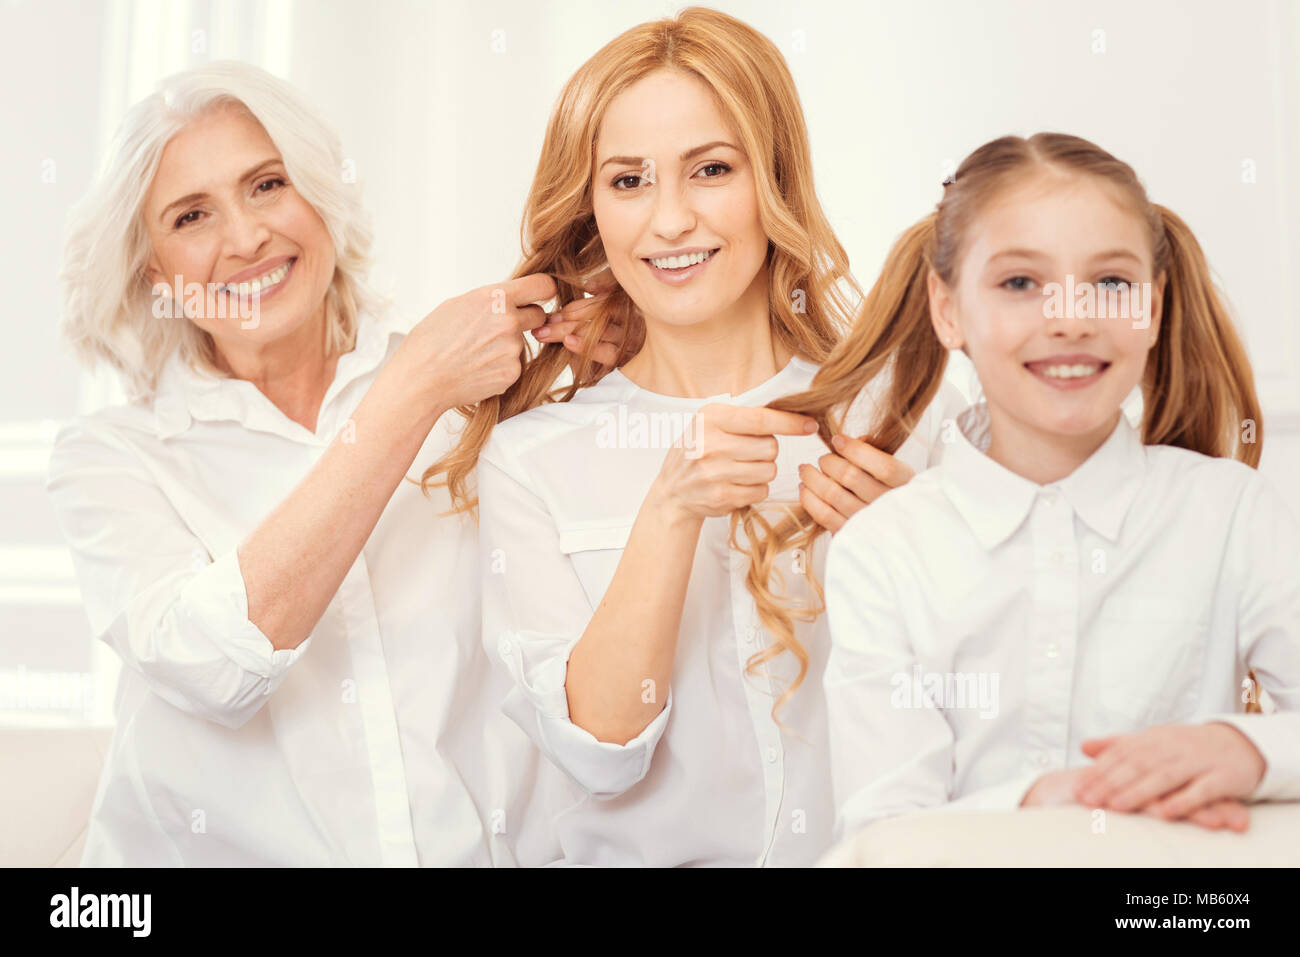 Beaming family female members braiding hair together Stock Photo